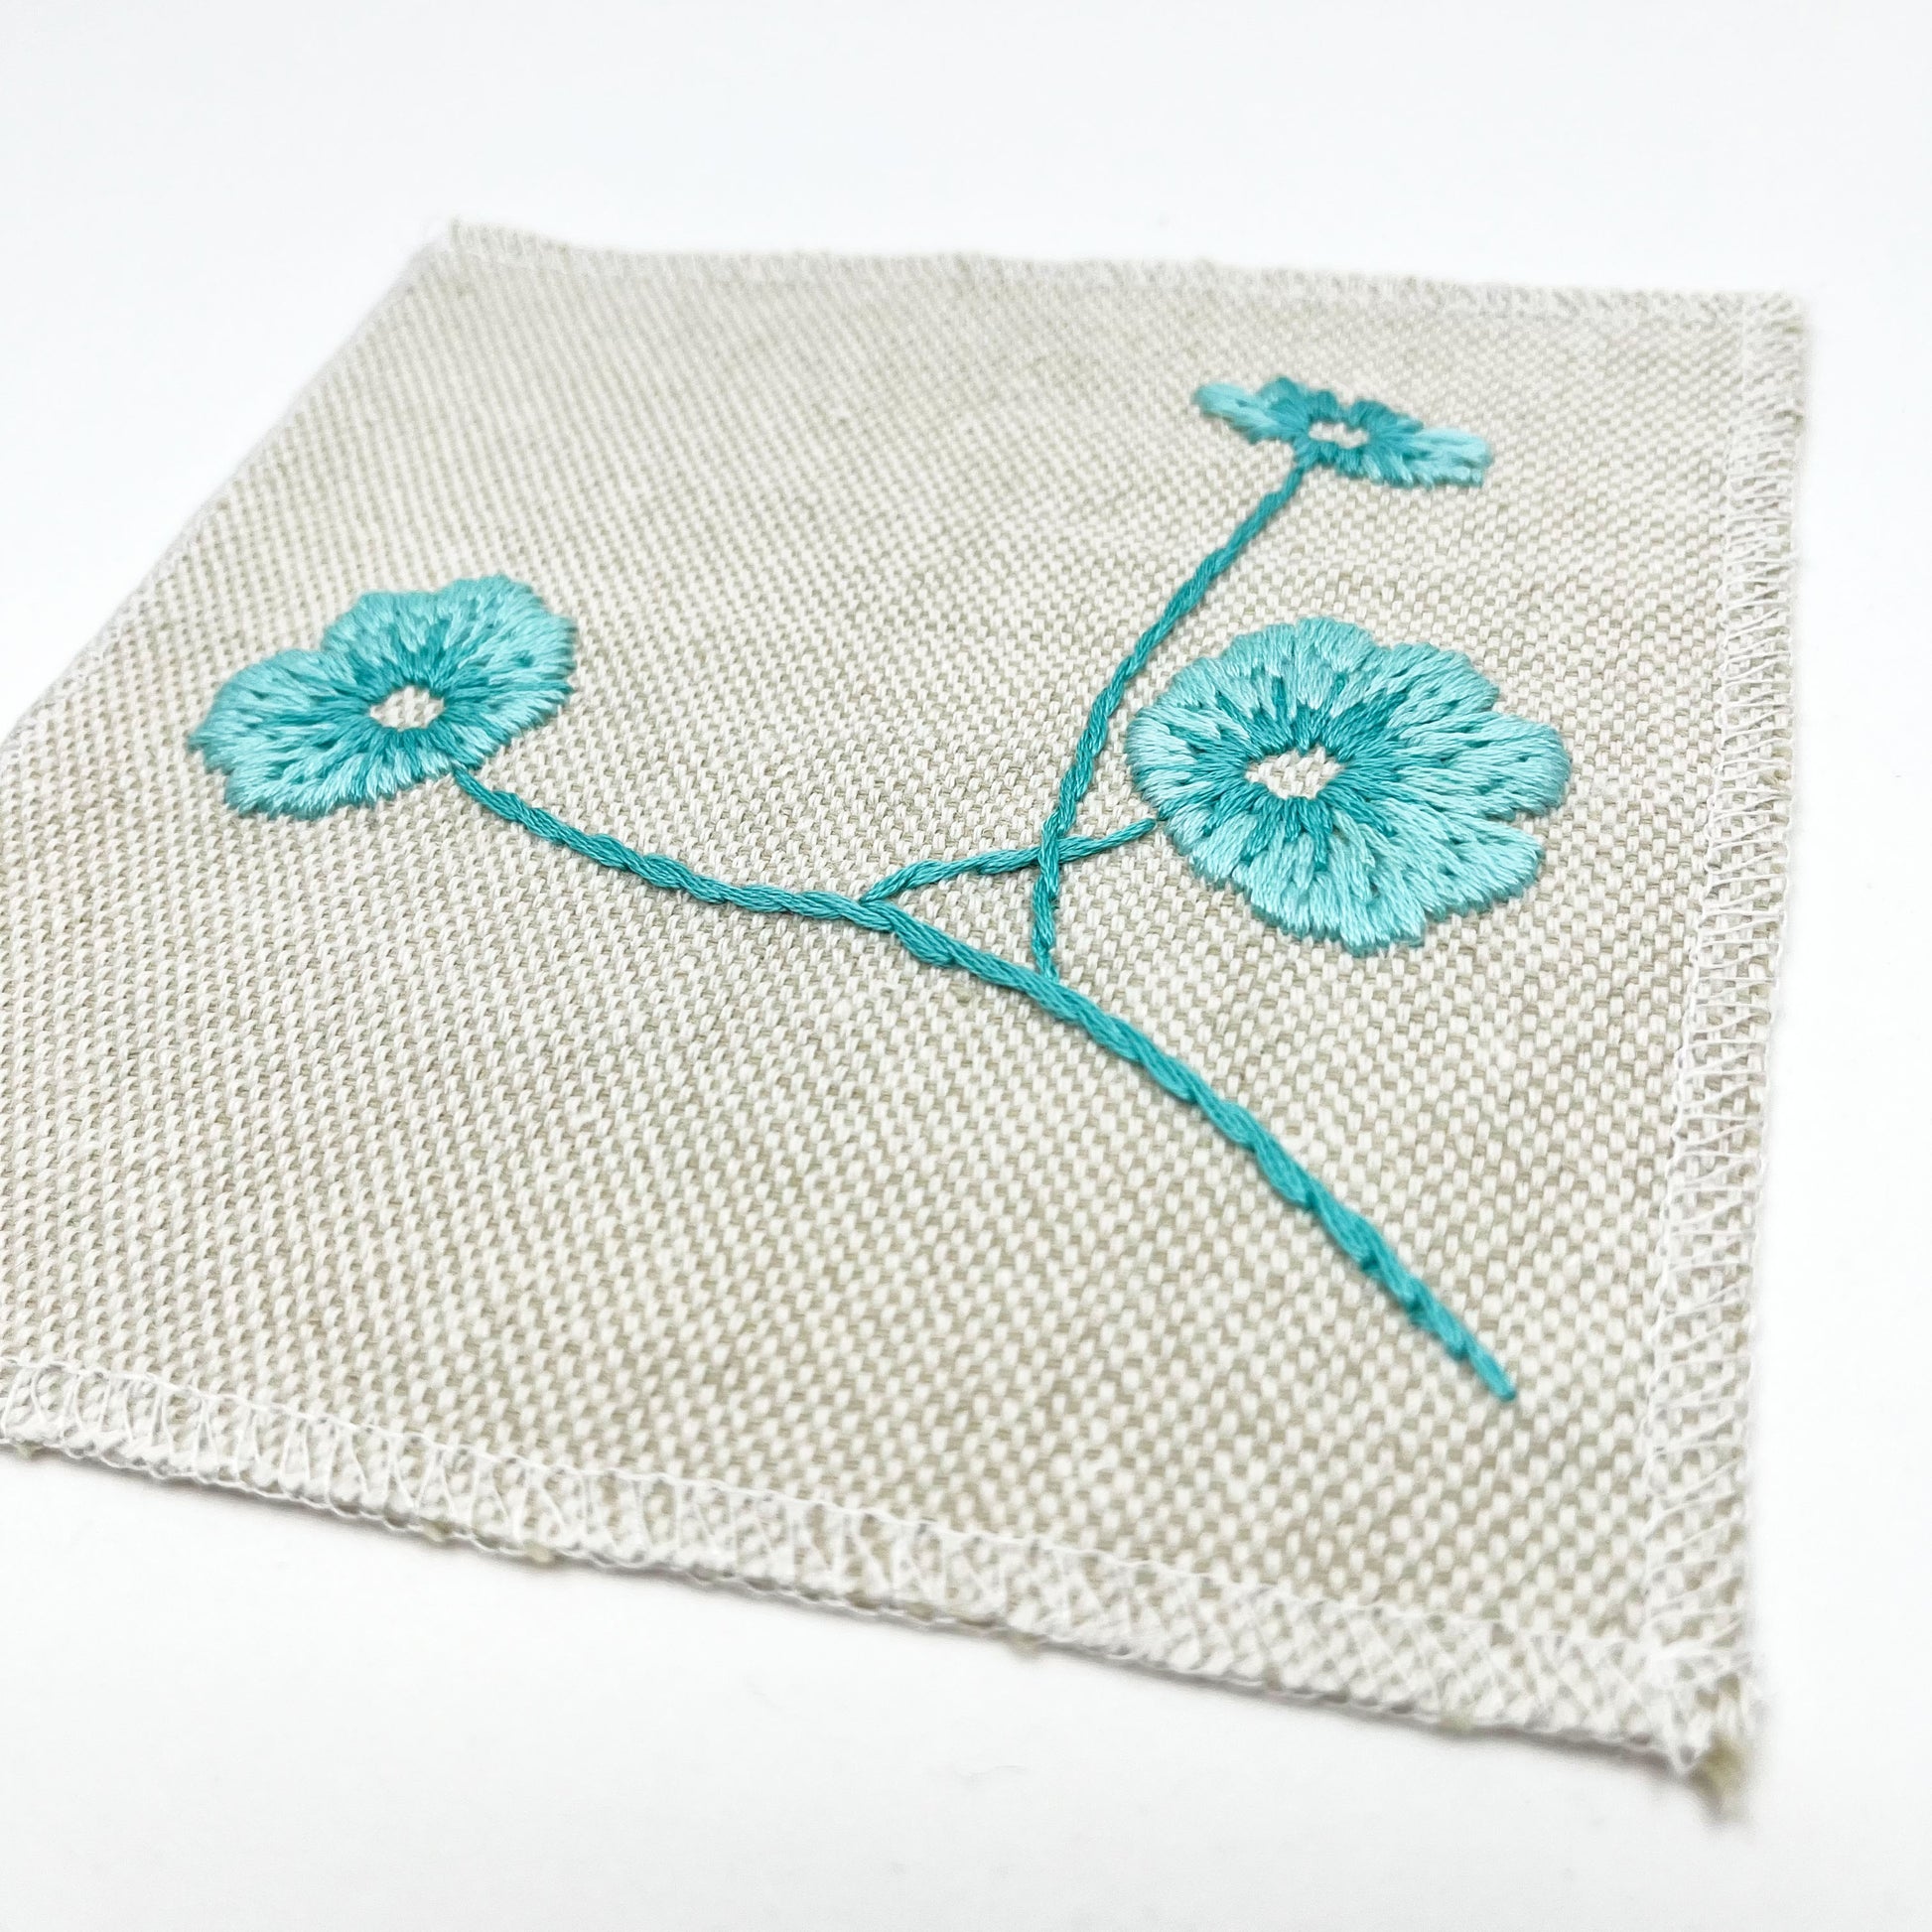 a close up angled view of a natural colored square patch, hand embroidered with three poppies on a stem, in shades of robin's egg blue, with overlocked edges, on a white background